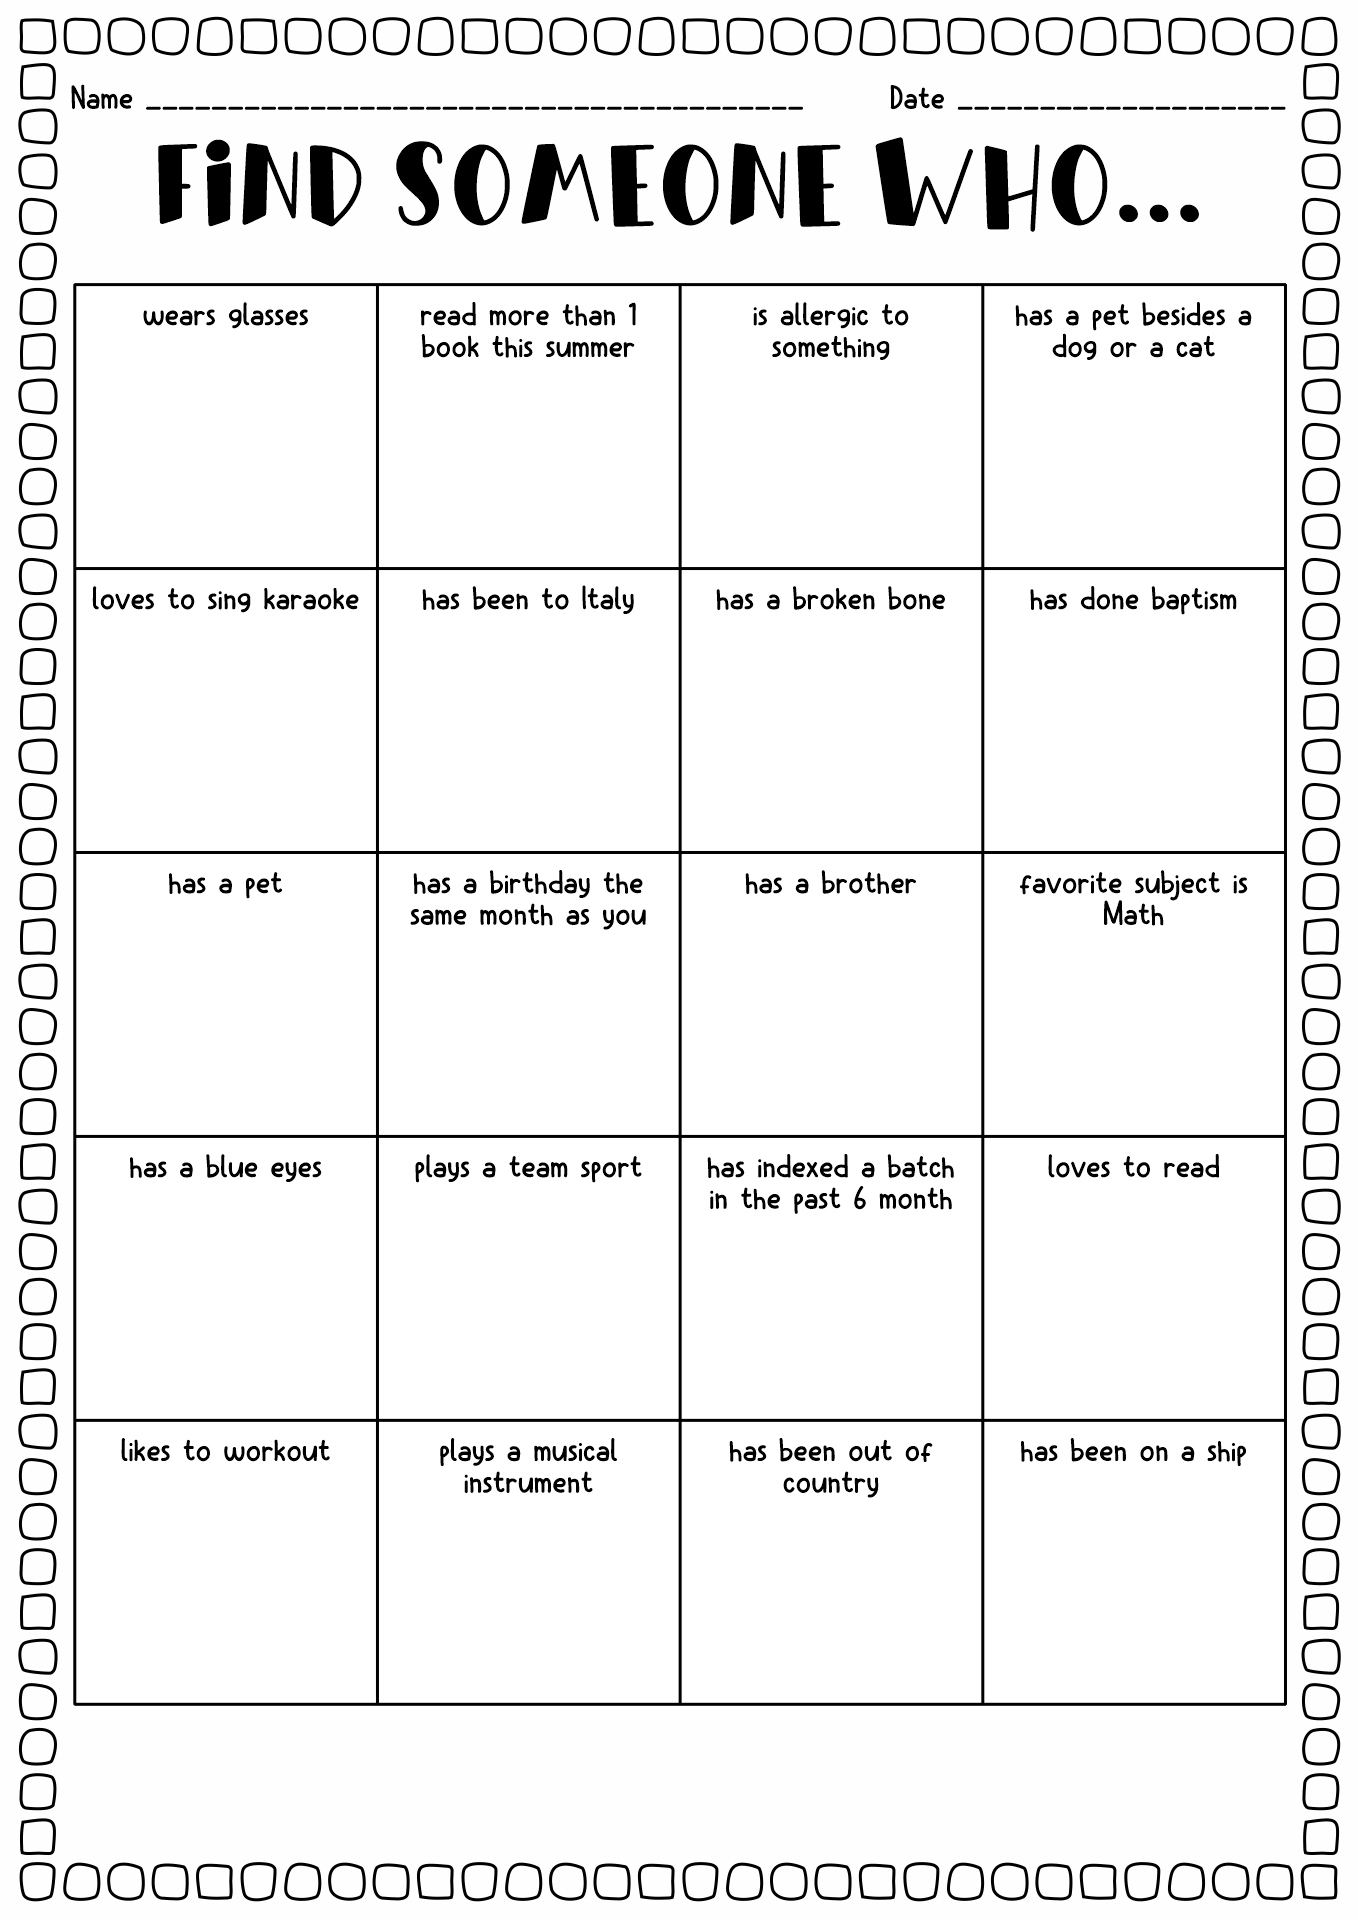 Getting to Know You Scavenger Hunt Worksheet Image